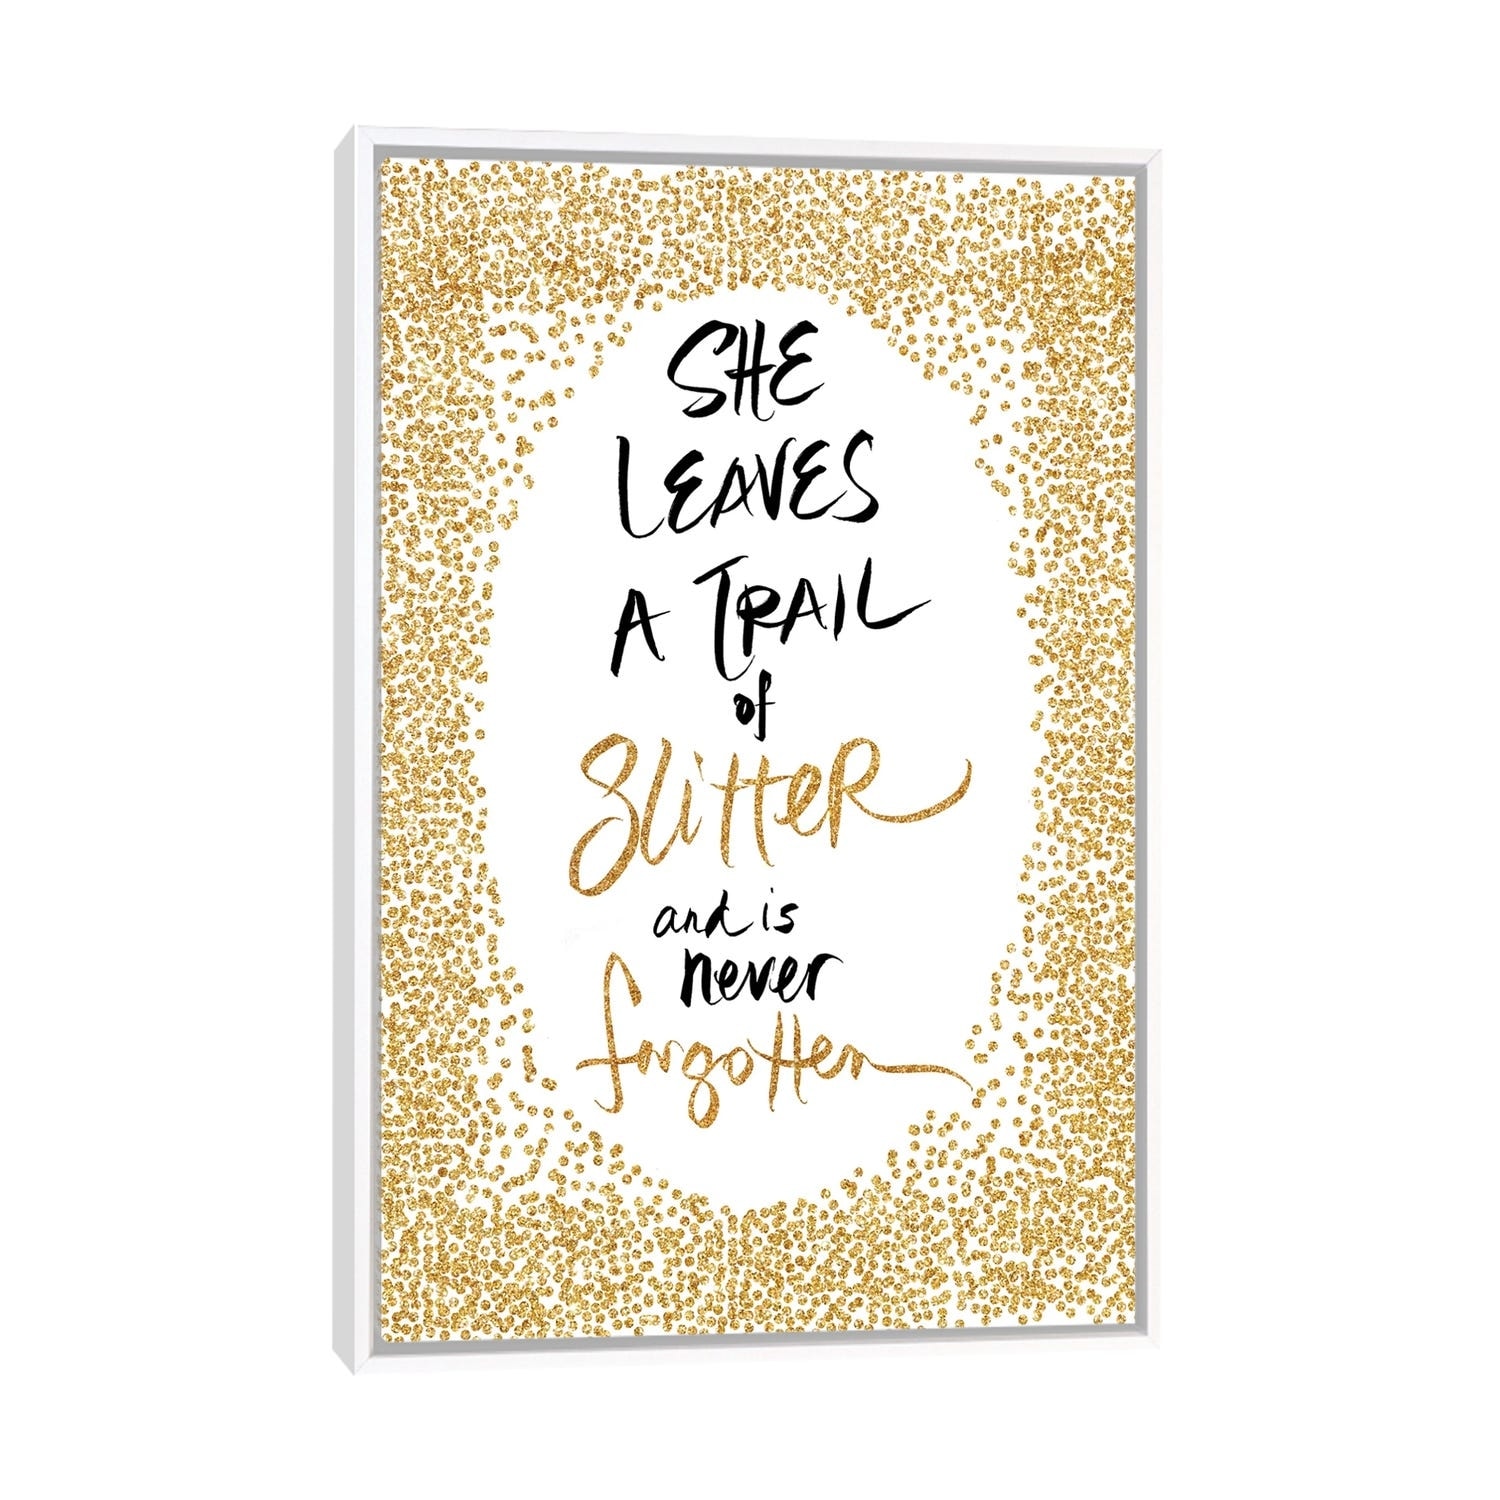 she who leaves a trail of glitter is never forgotten